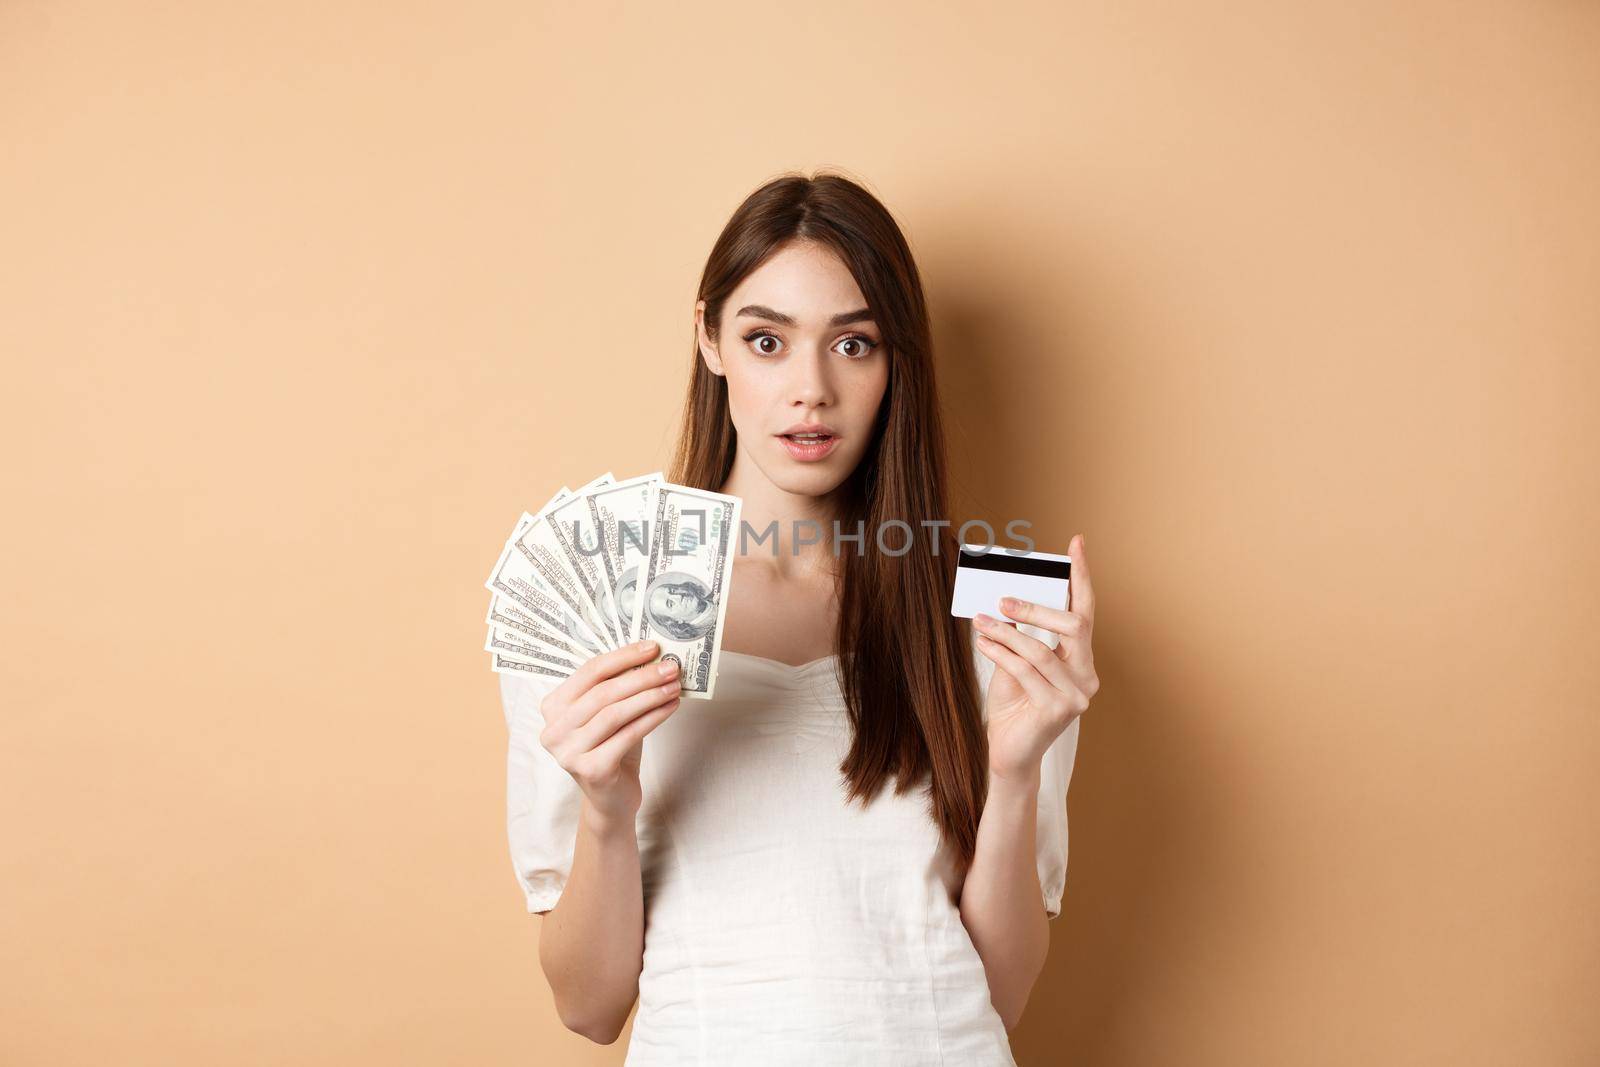 Excited woman holding dollar bills and plastic credit card, looking amazed at camera, standing on beige background.